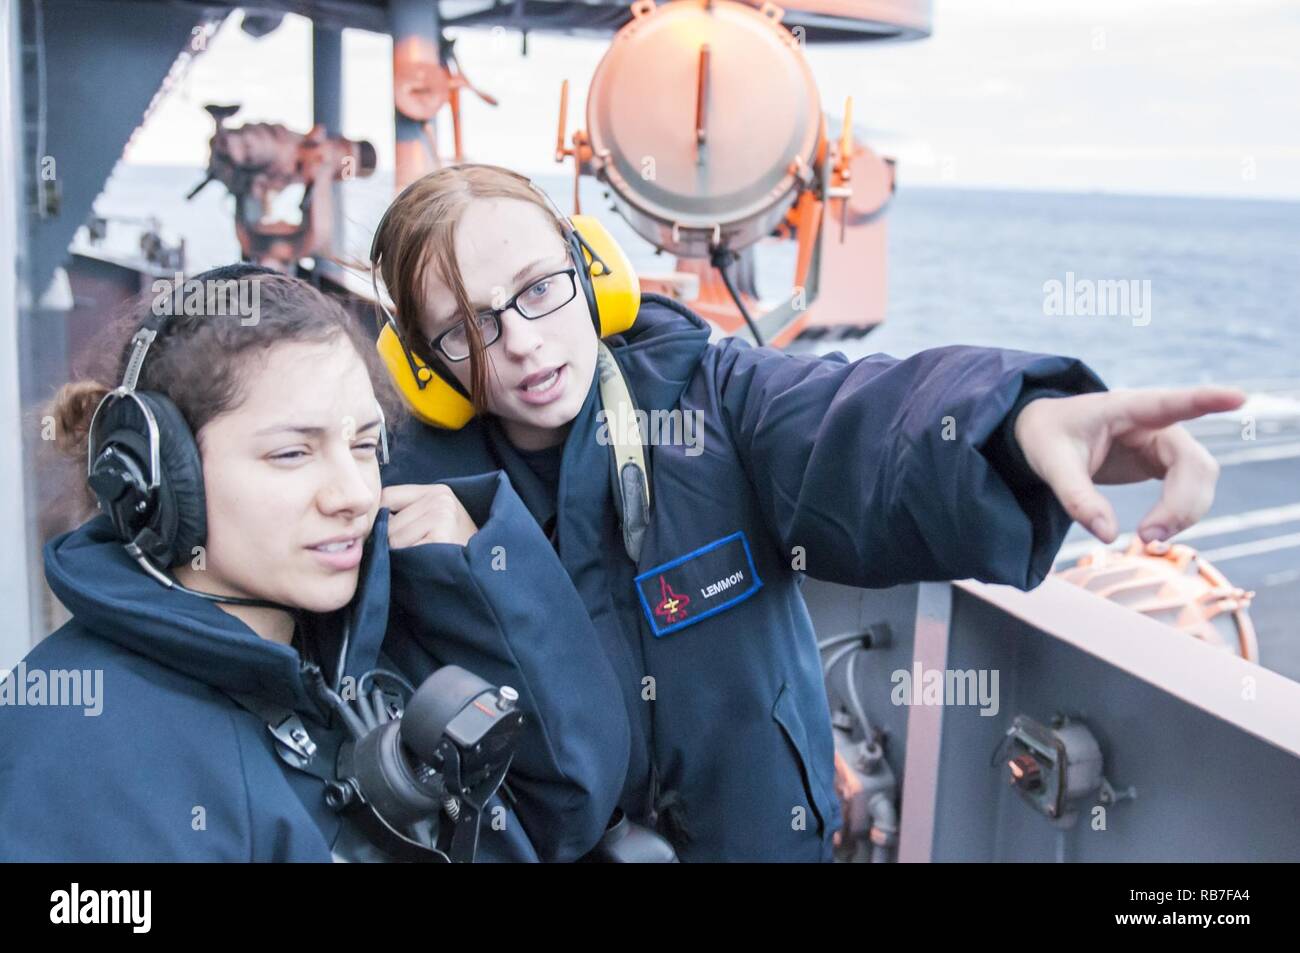 ATLANTIC OCEAN (Dec. 3, 2016) Seaman Caitlin Lemmon trains Seaman Quirina Zayas on how to point out contacts during forward lookout watch aboard the aircraft carrier USS George H.W. Bush (CVN 77). GHWB is underway conducting a Composite Training Unit Exercise (COMPTUEX) with the George H.W. Bush Carrier Strike Group in preparation for an upcoming deployment. Stock Photo